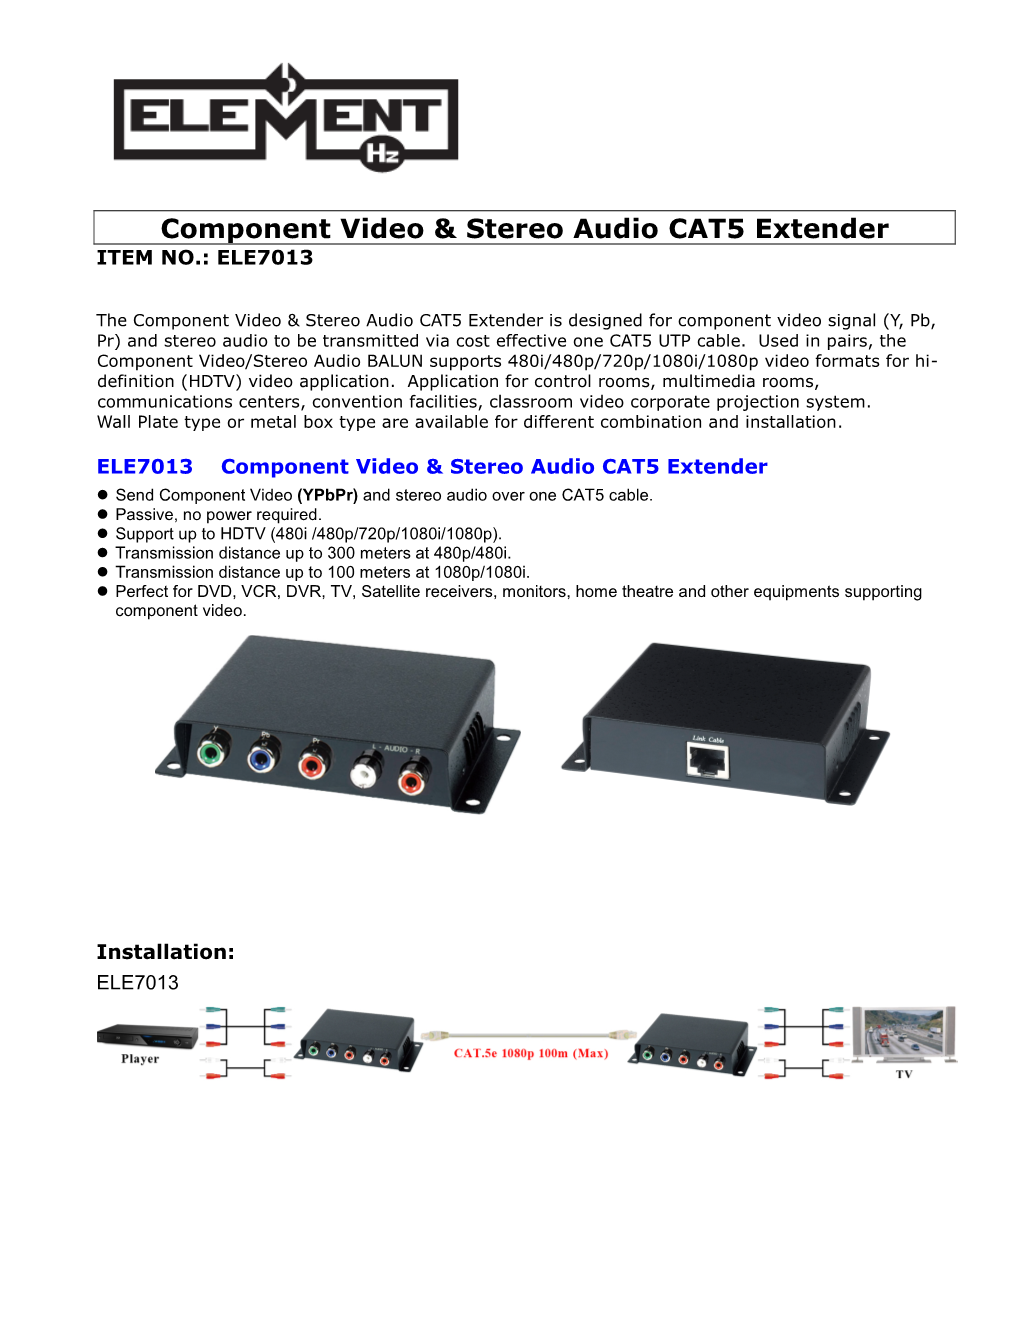 Component Video & Stereo Audio CAT5 Extender